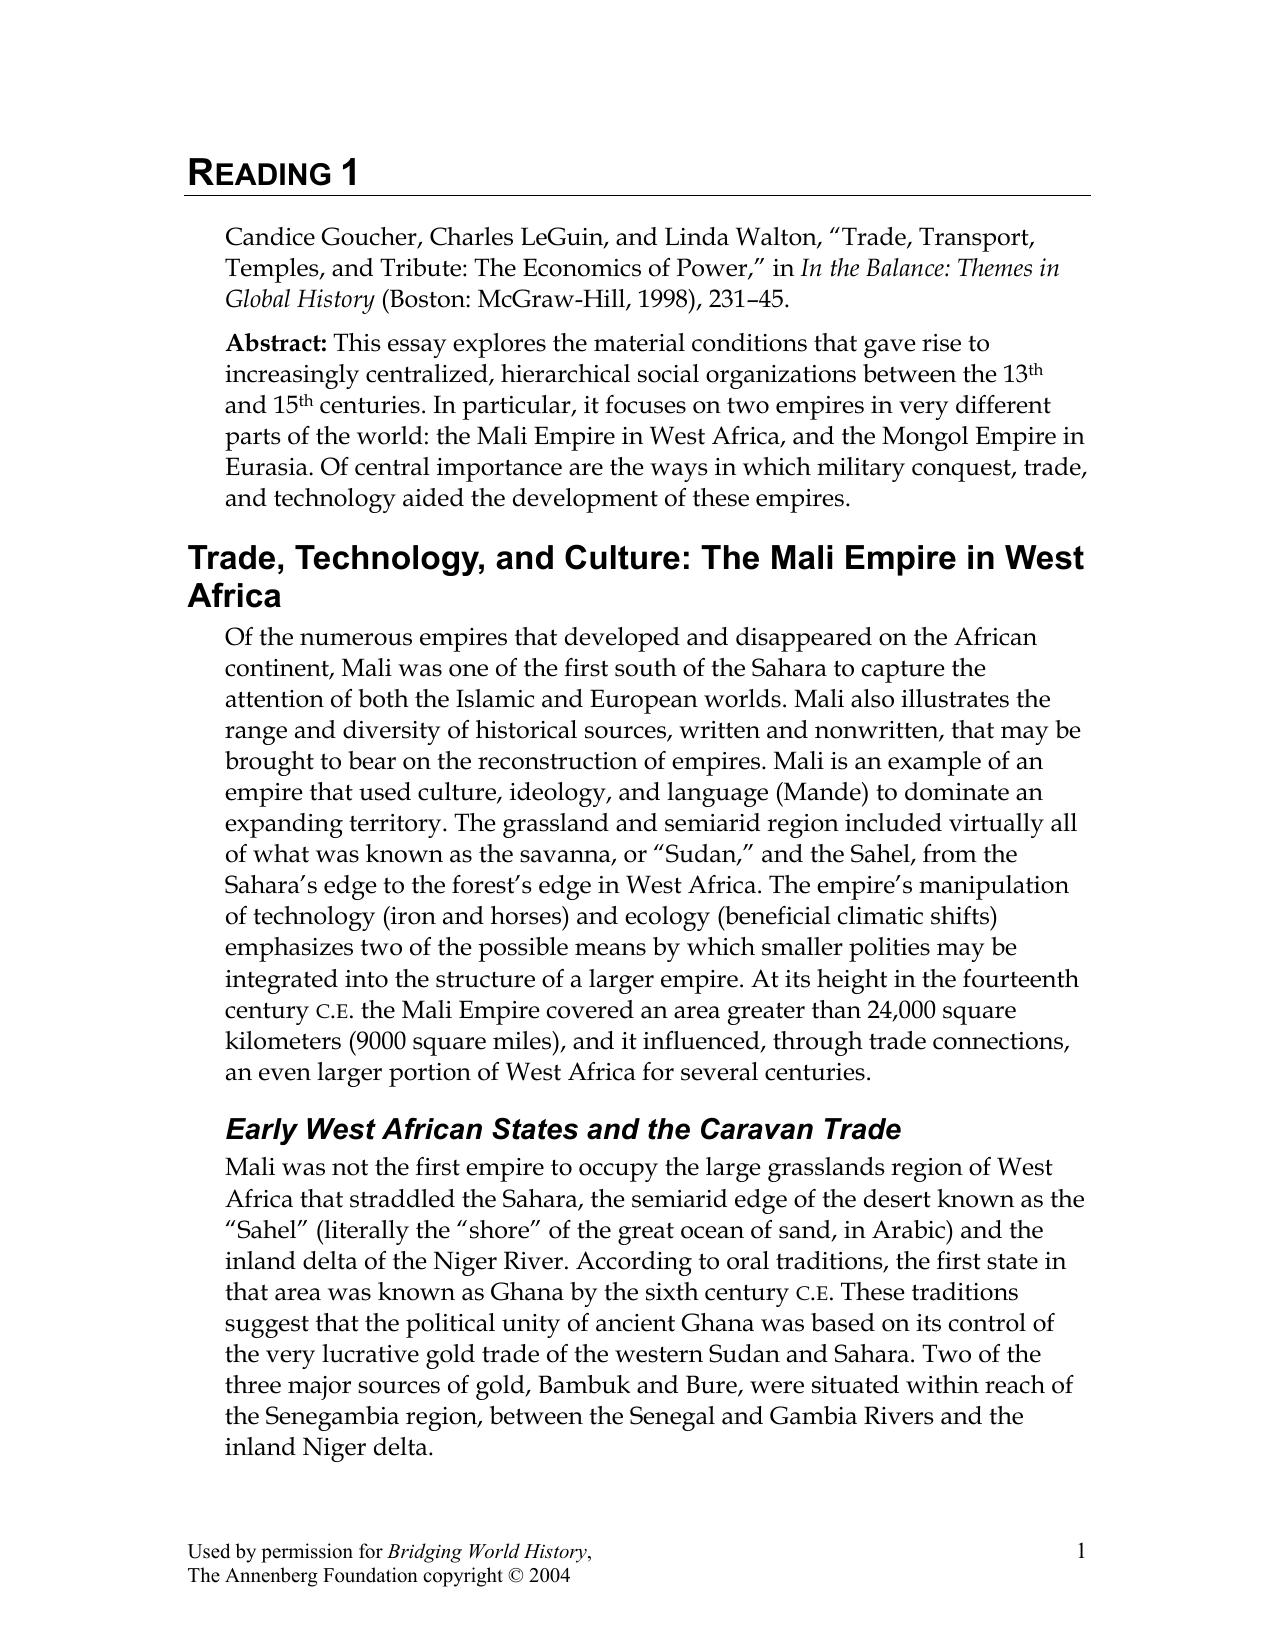 Trade, Technology, and Culture The Mali Empire in West